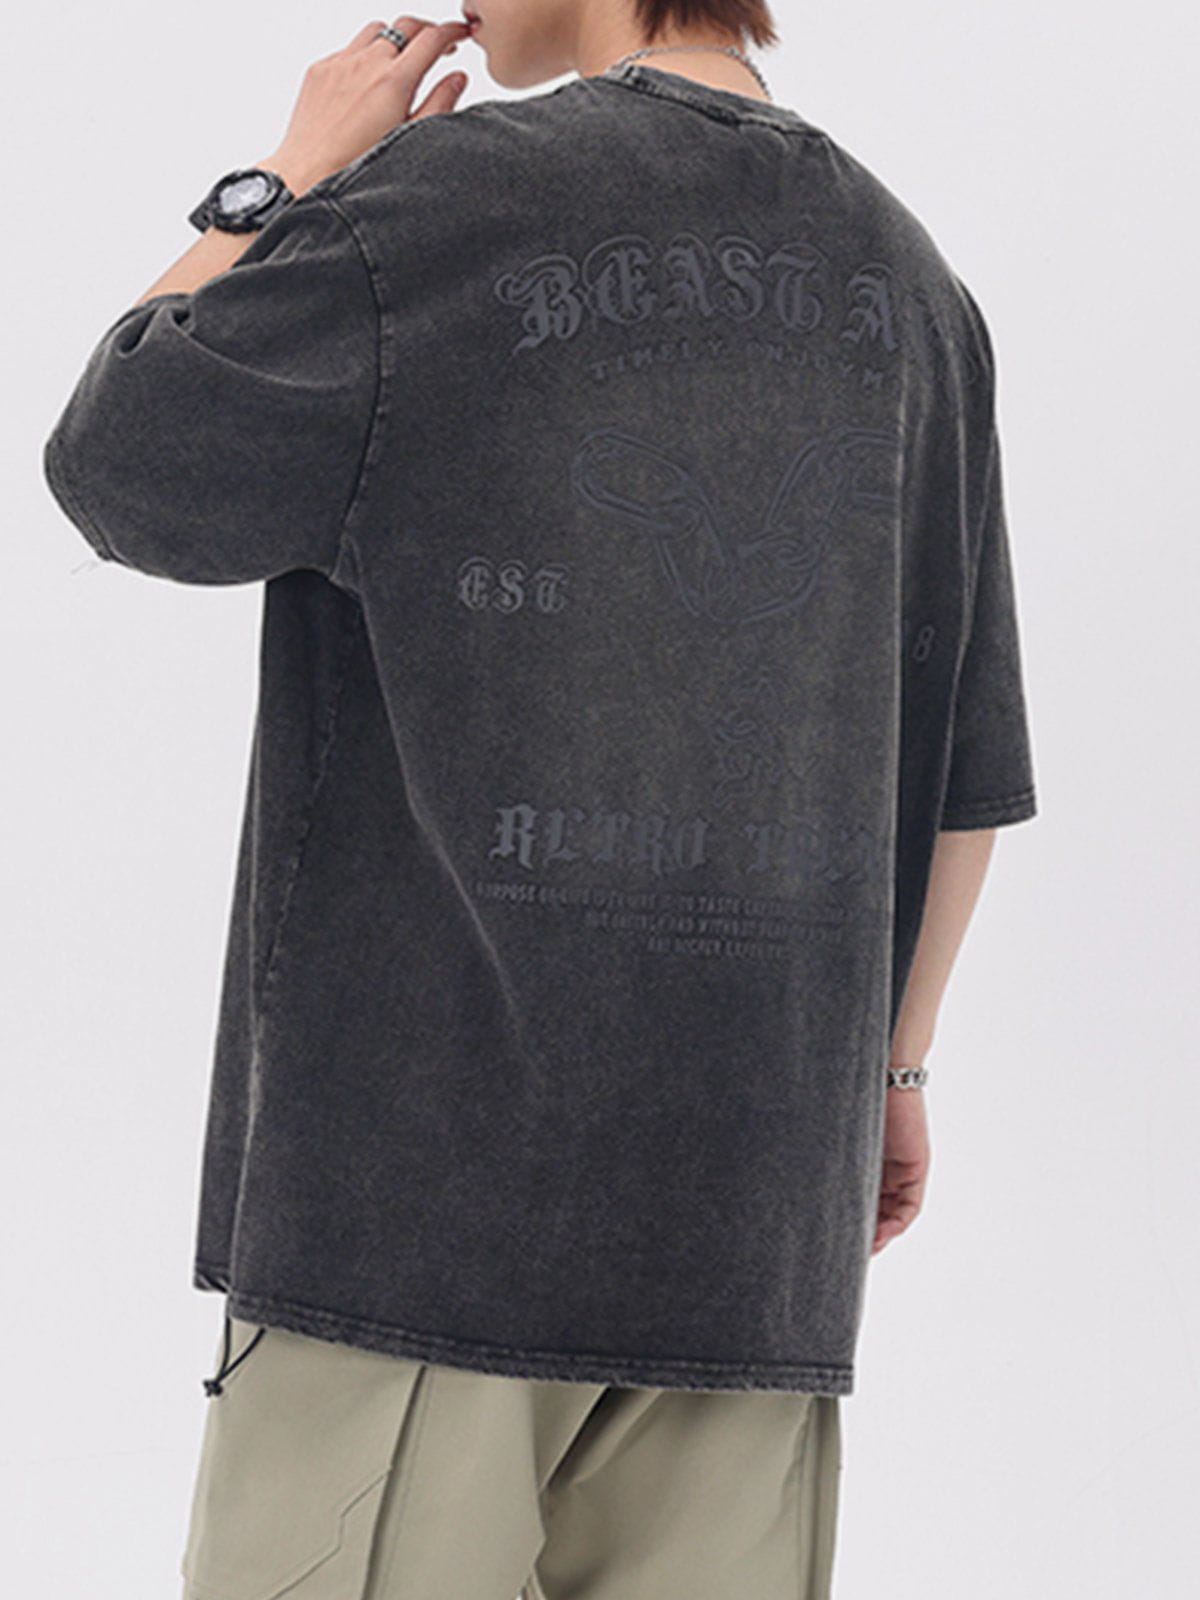 Sneakerland™ - Gothic Vintage Washed Tee